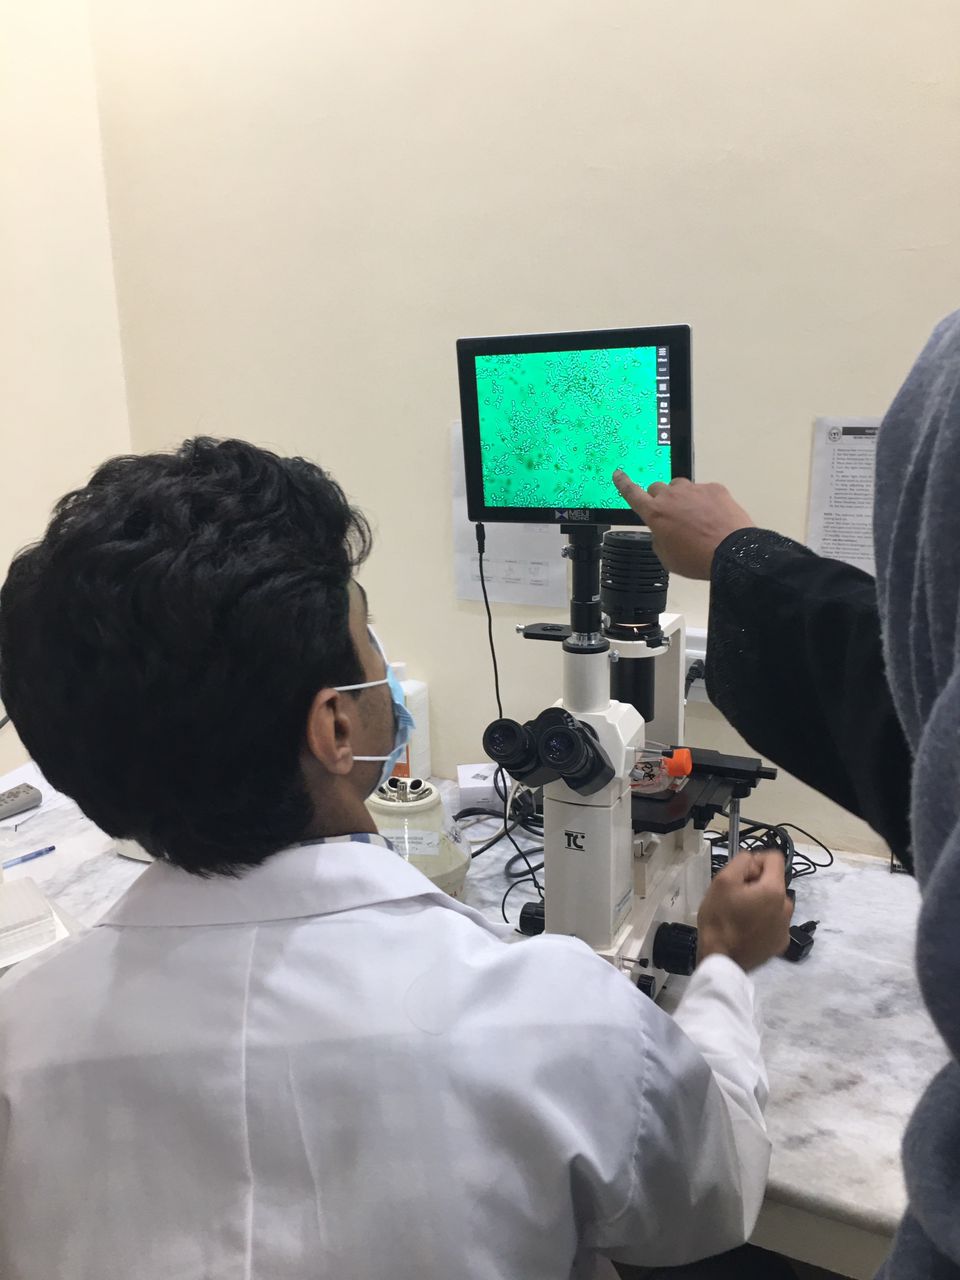 2nd round of “hands on training for cell culture technique” at FMDRC specially for our college students CMH LMC & IOD